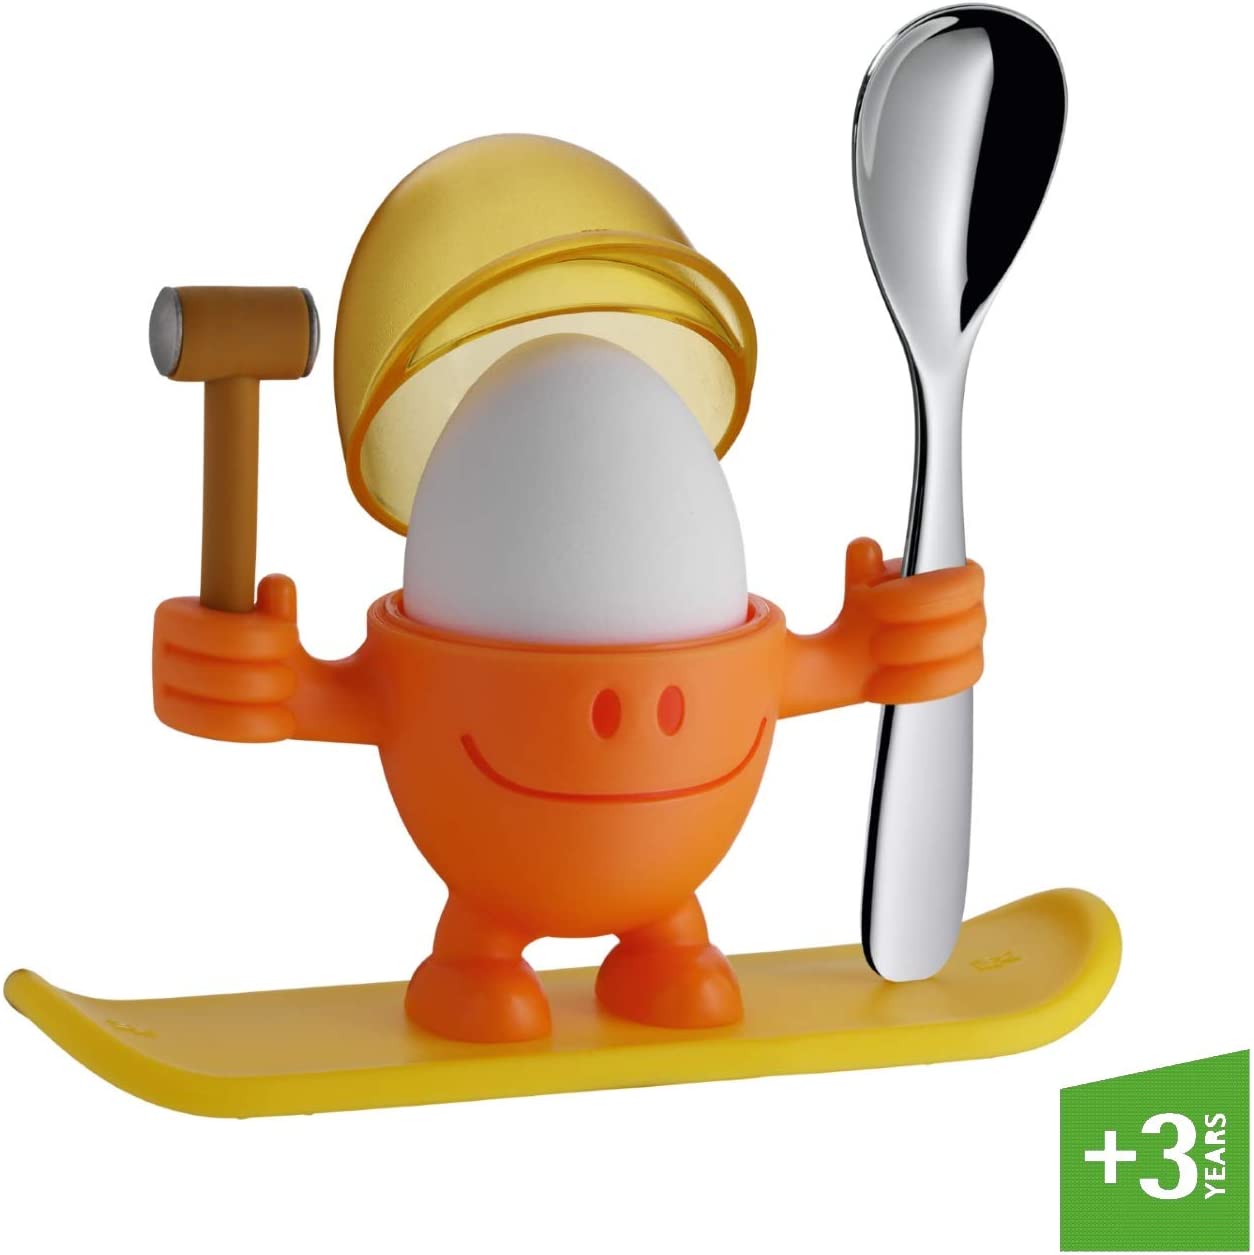 Wmf Mcegg Egg Cup With Spoon Limited Edition Plastic, Cromargan Polished St